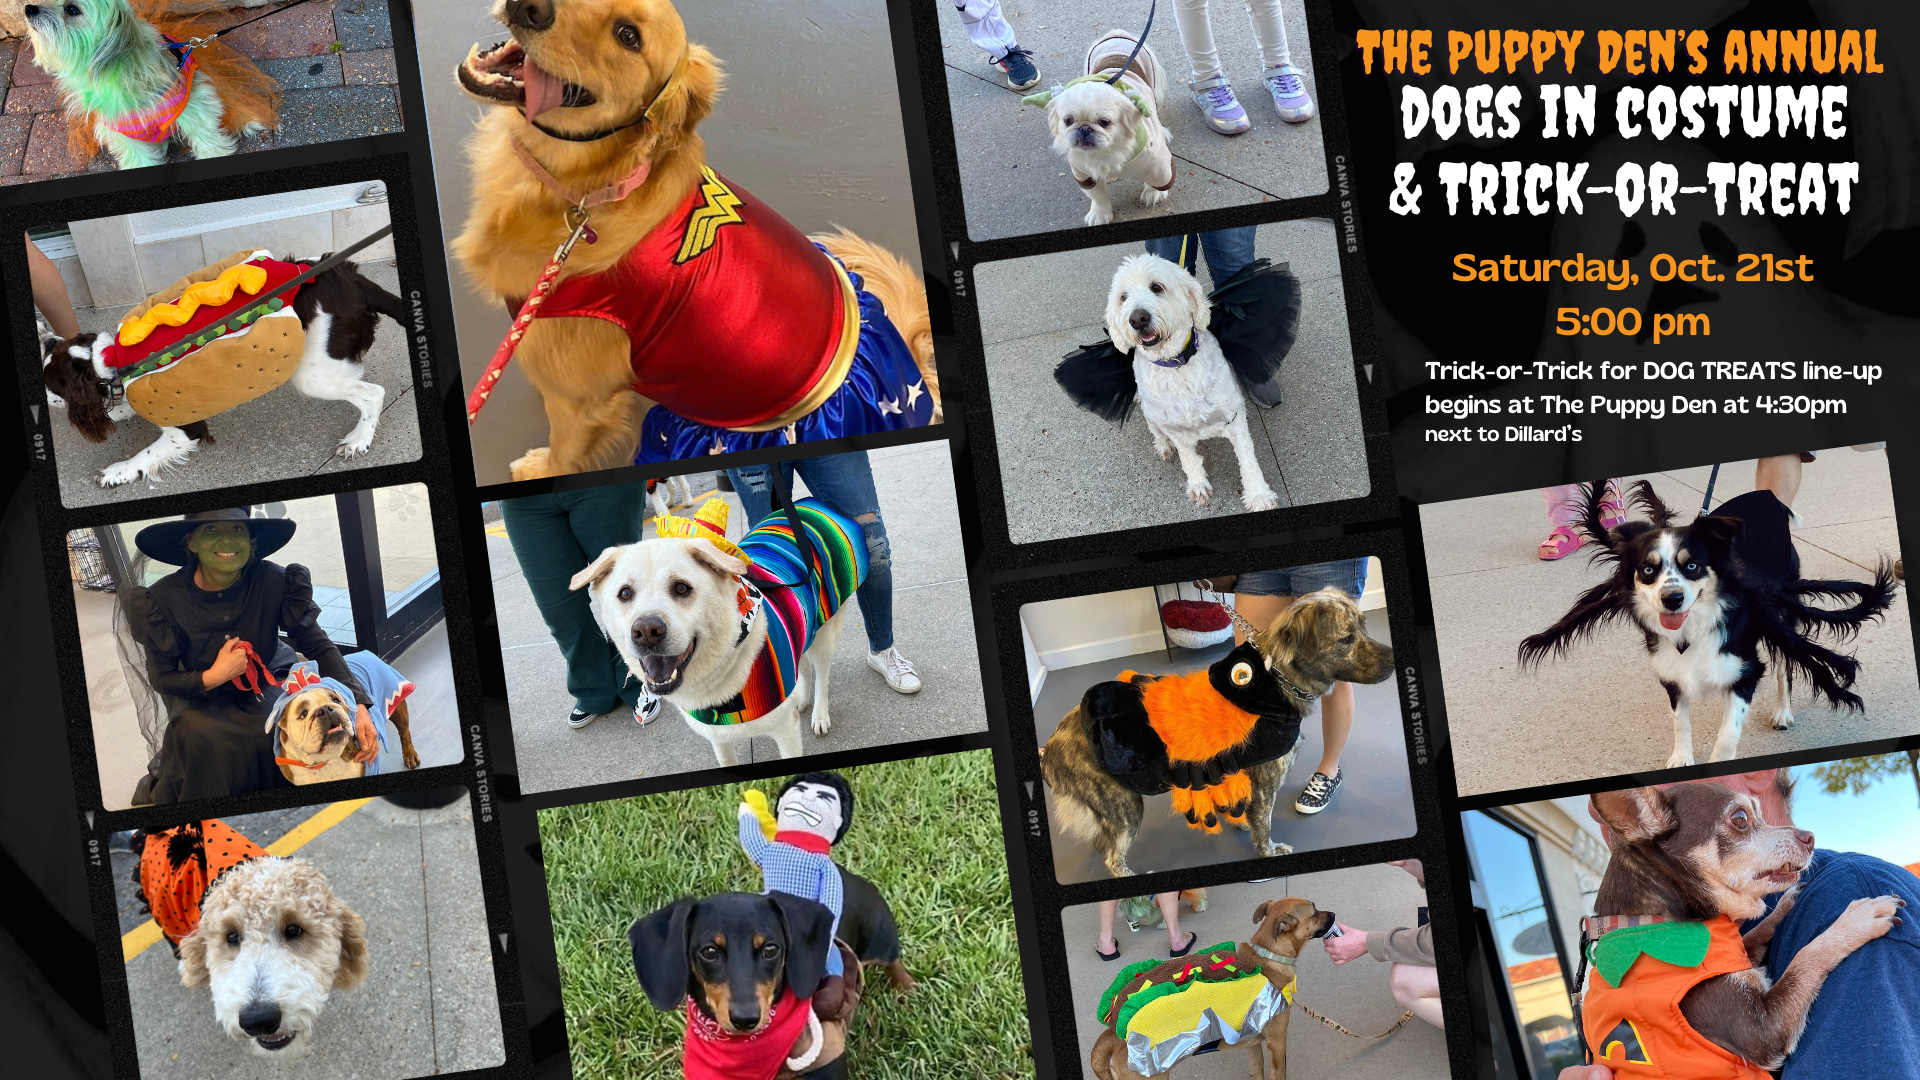 The Puppy Den Dog Costume Parade and Trick-or-Treat at Eastern Shore Centre